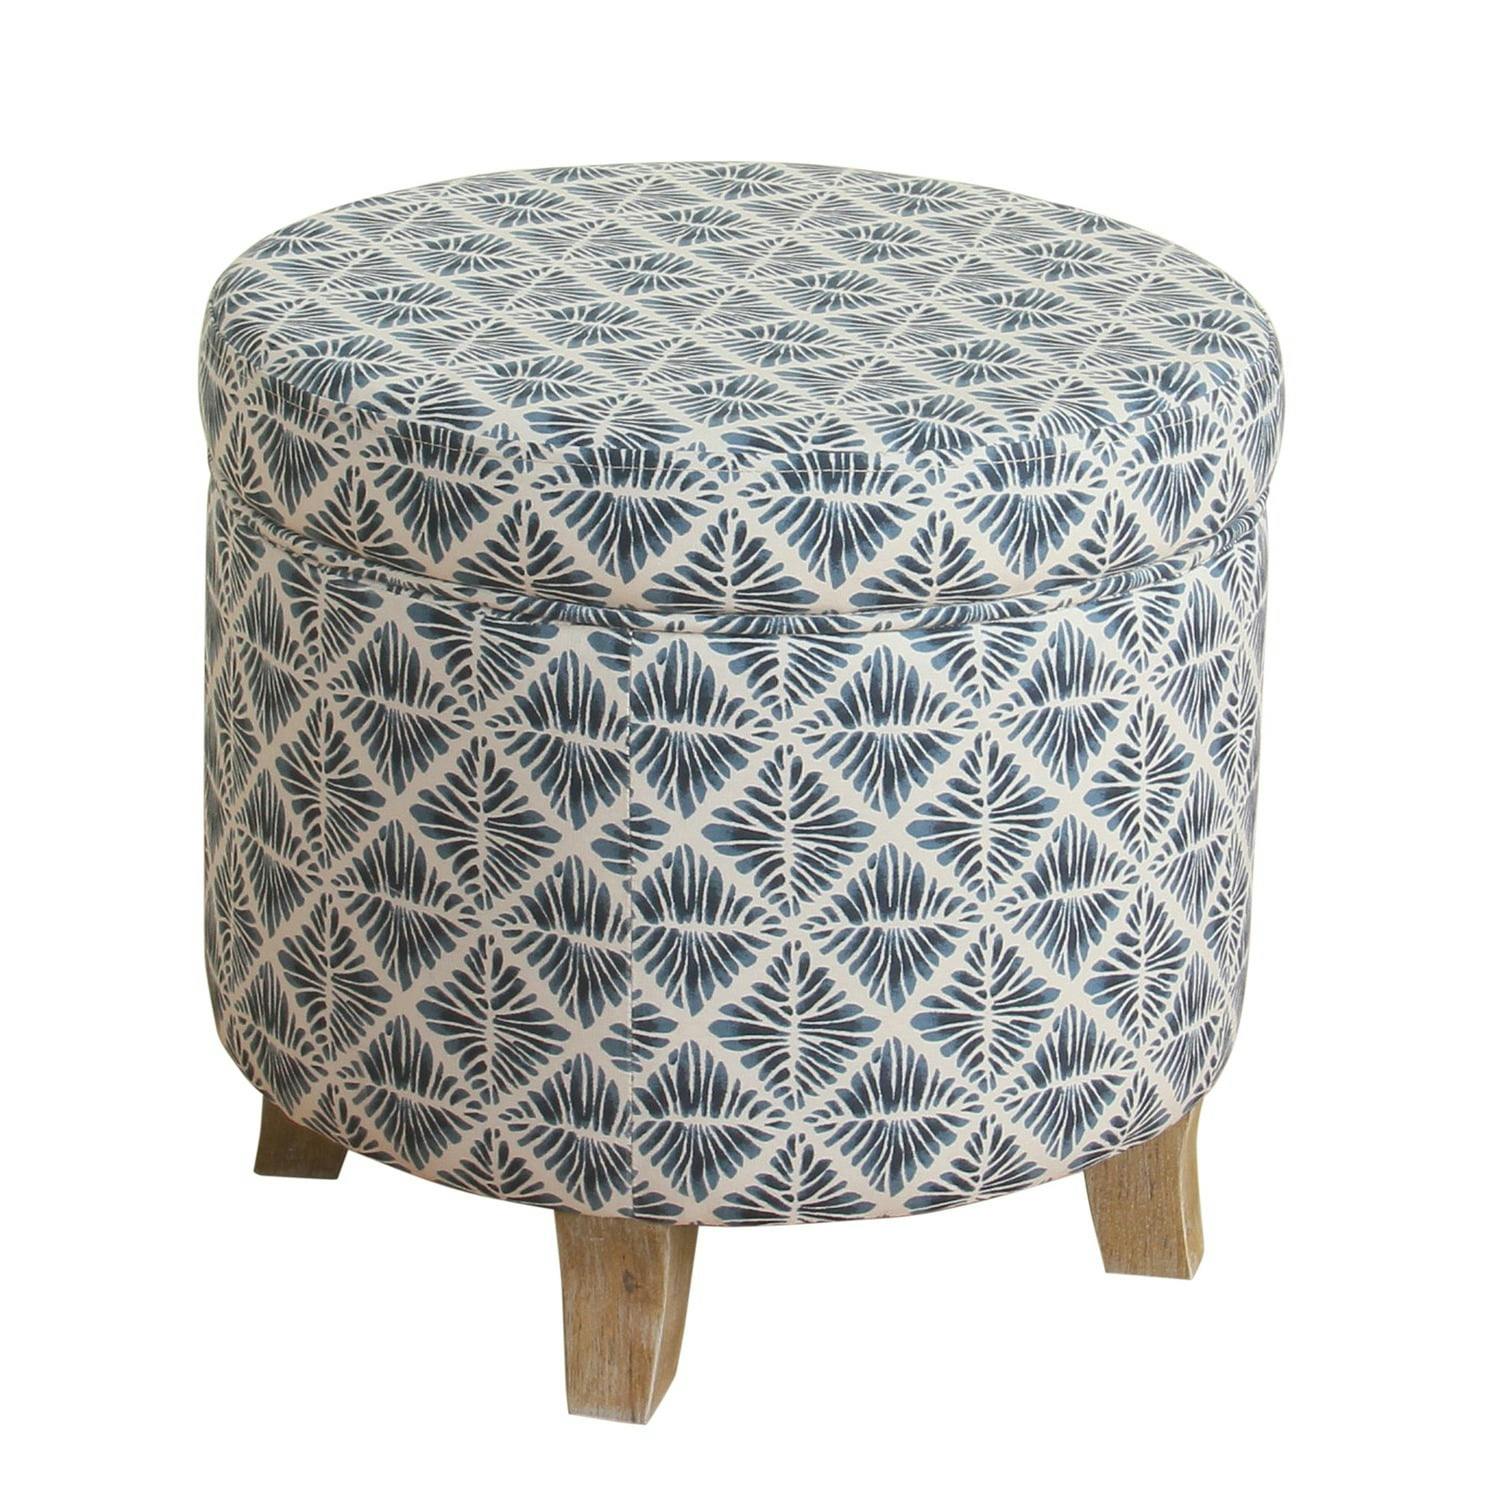 Benzara Round Blue and White Fabric Upholstered Wooden Ottoman with Storage